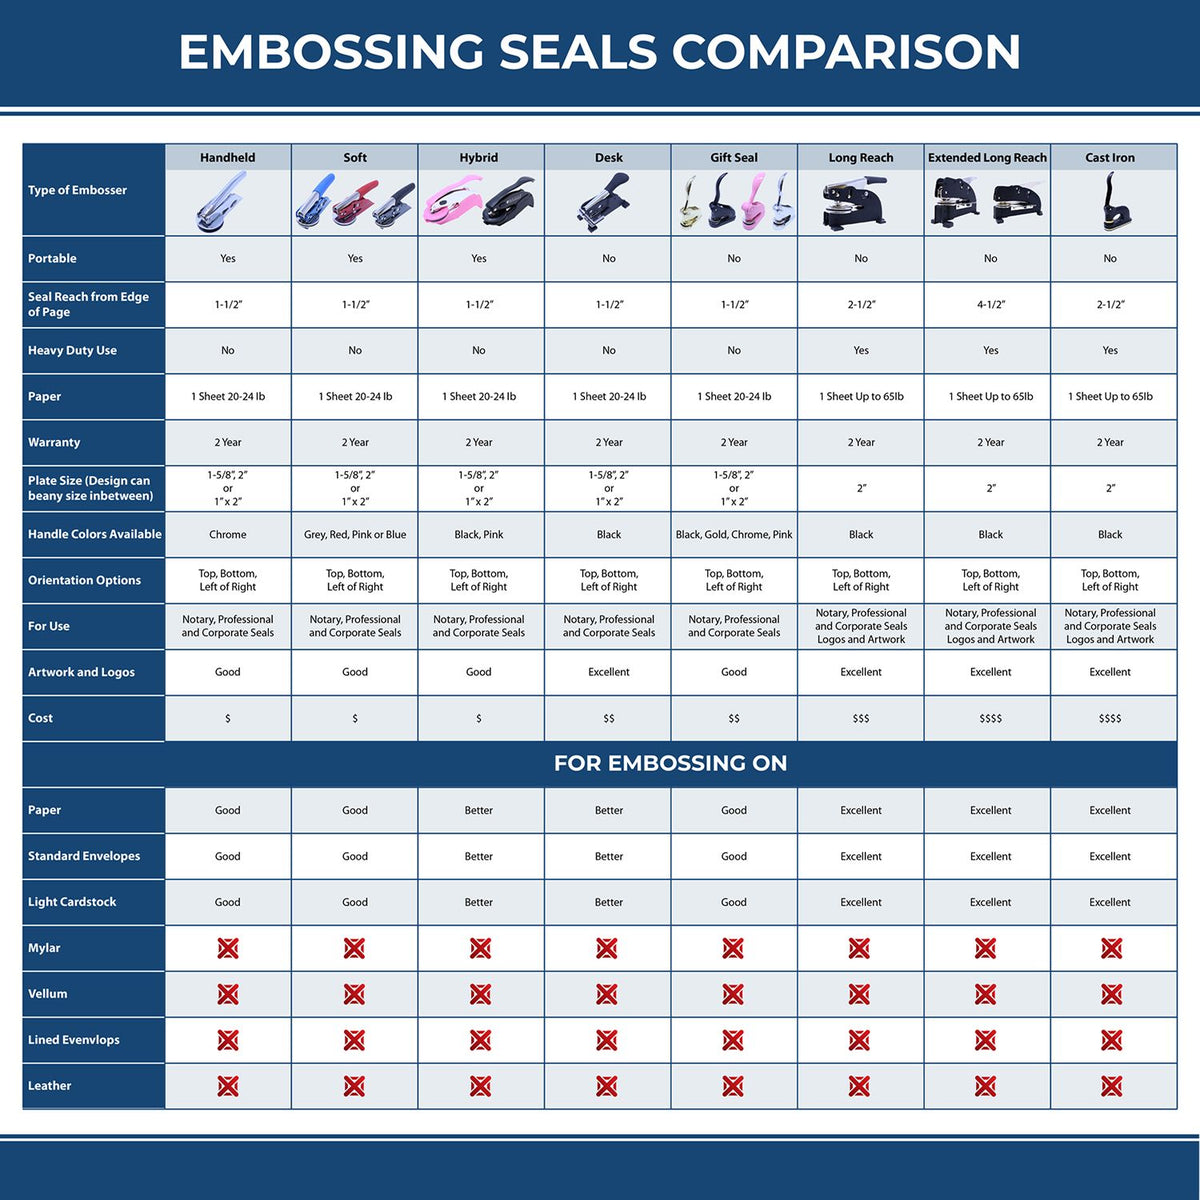 A comparison chart for the different types of mount models available for the Soft Guam Professional Geologist Seal